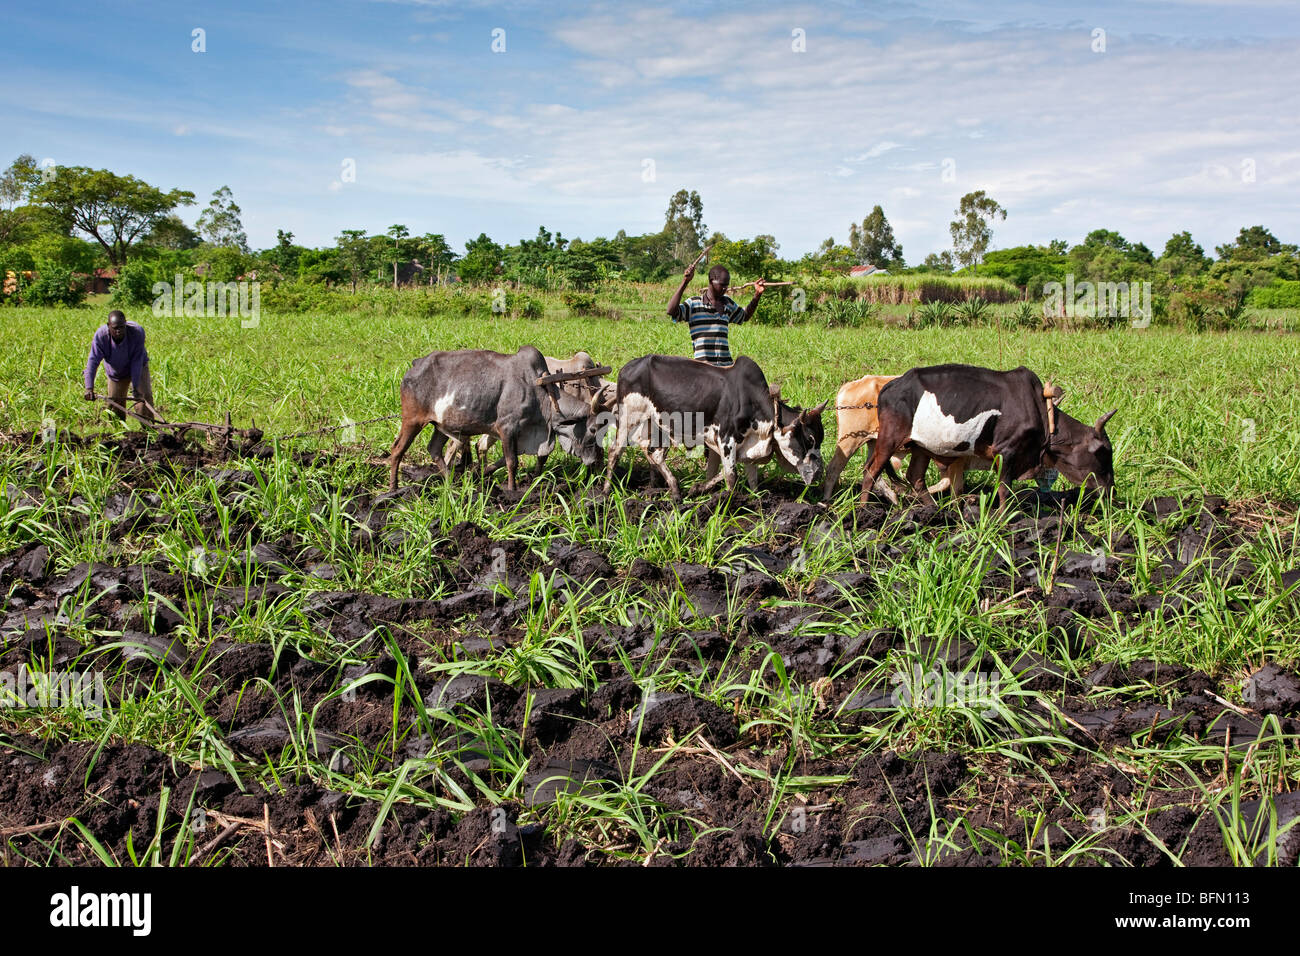 Kenya, Kisumu District. Small-scale farmers plough fields of sugar cane with a team of oxen. Stock Photo